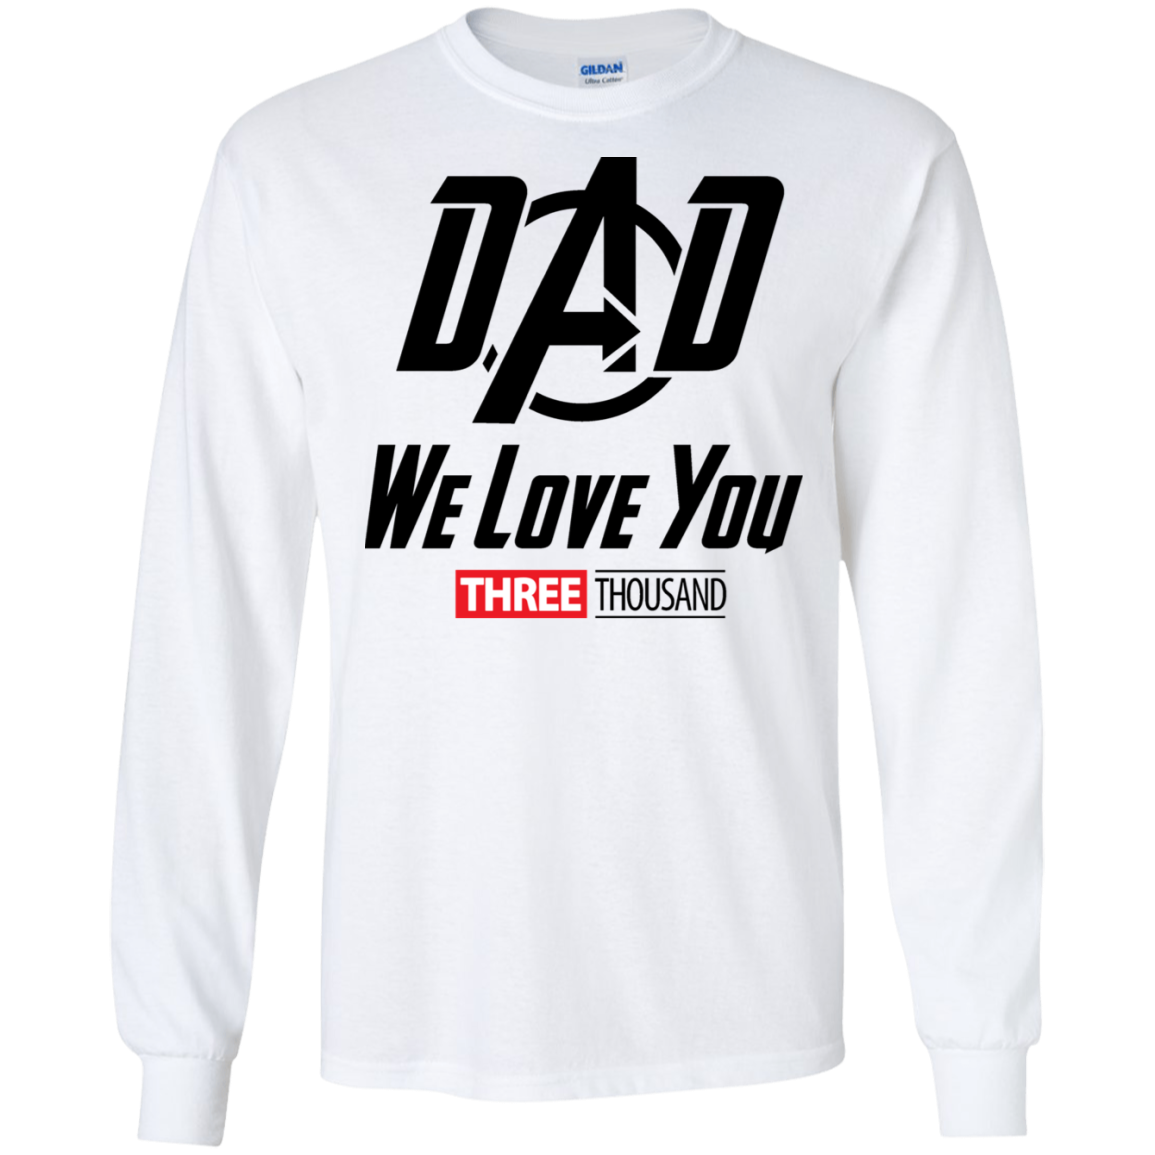 Dad We Love You - Long Sleeve T-Shirt